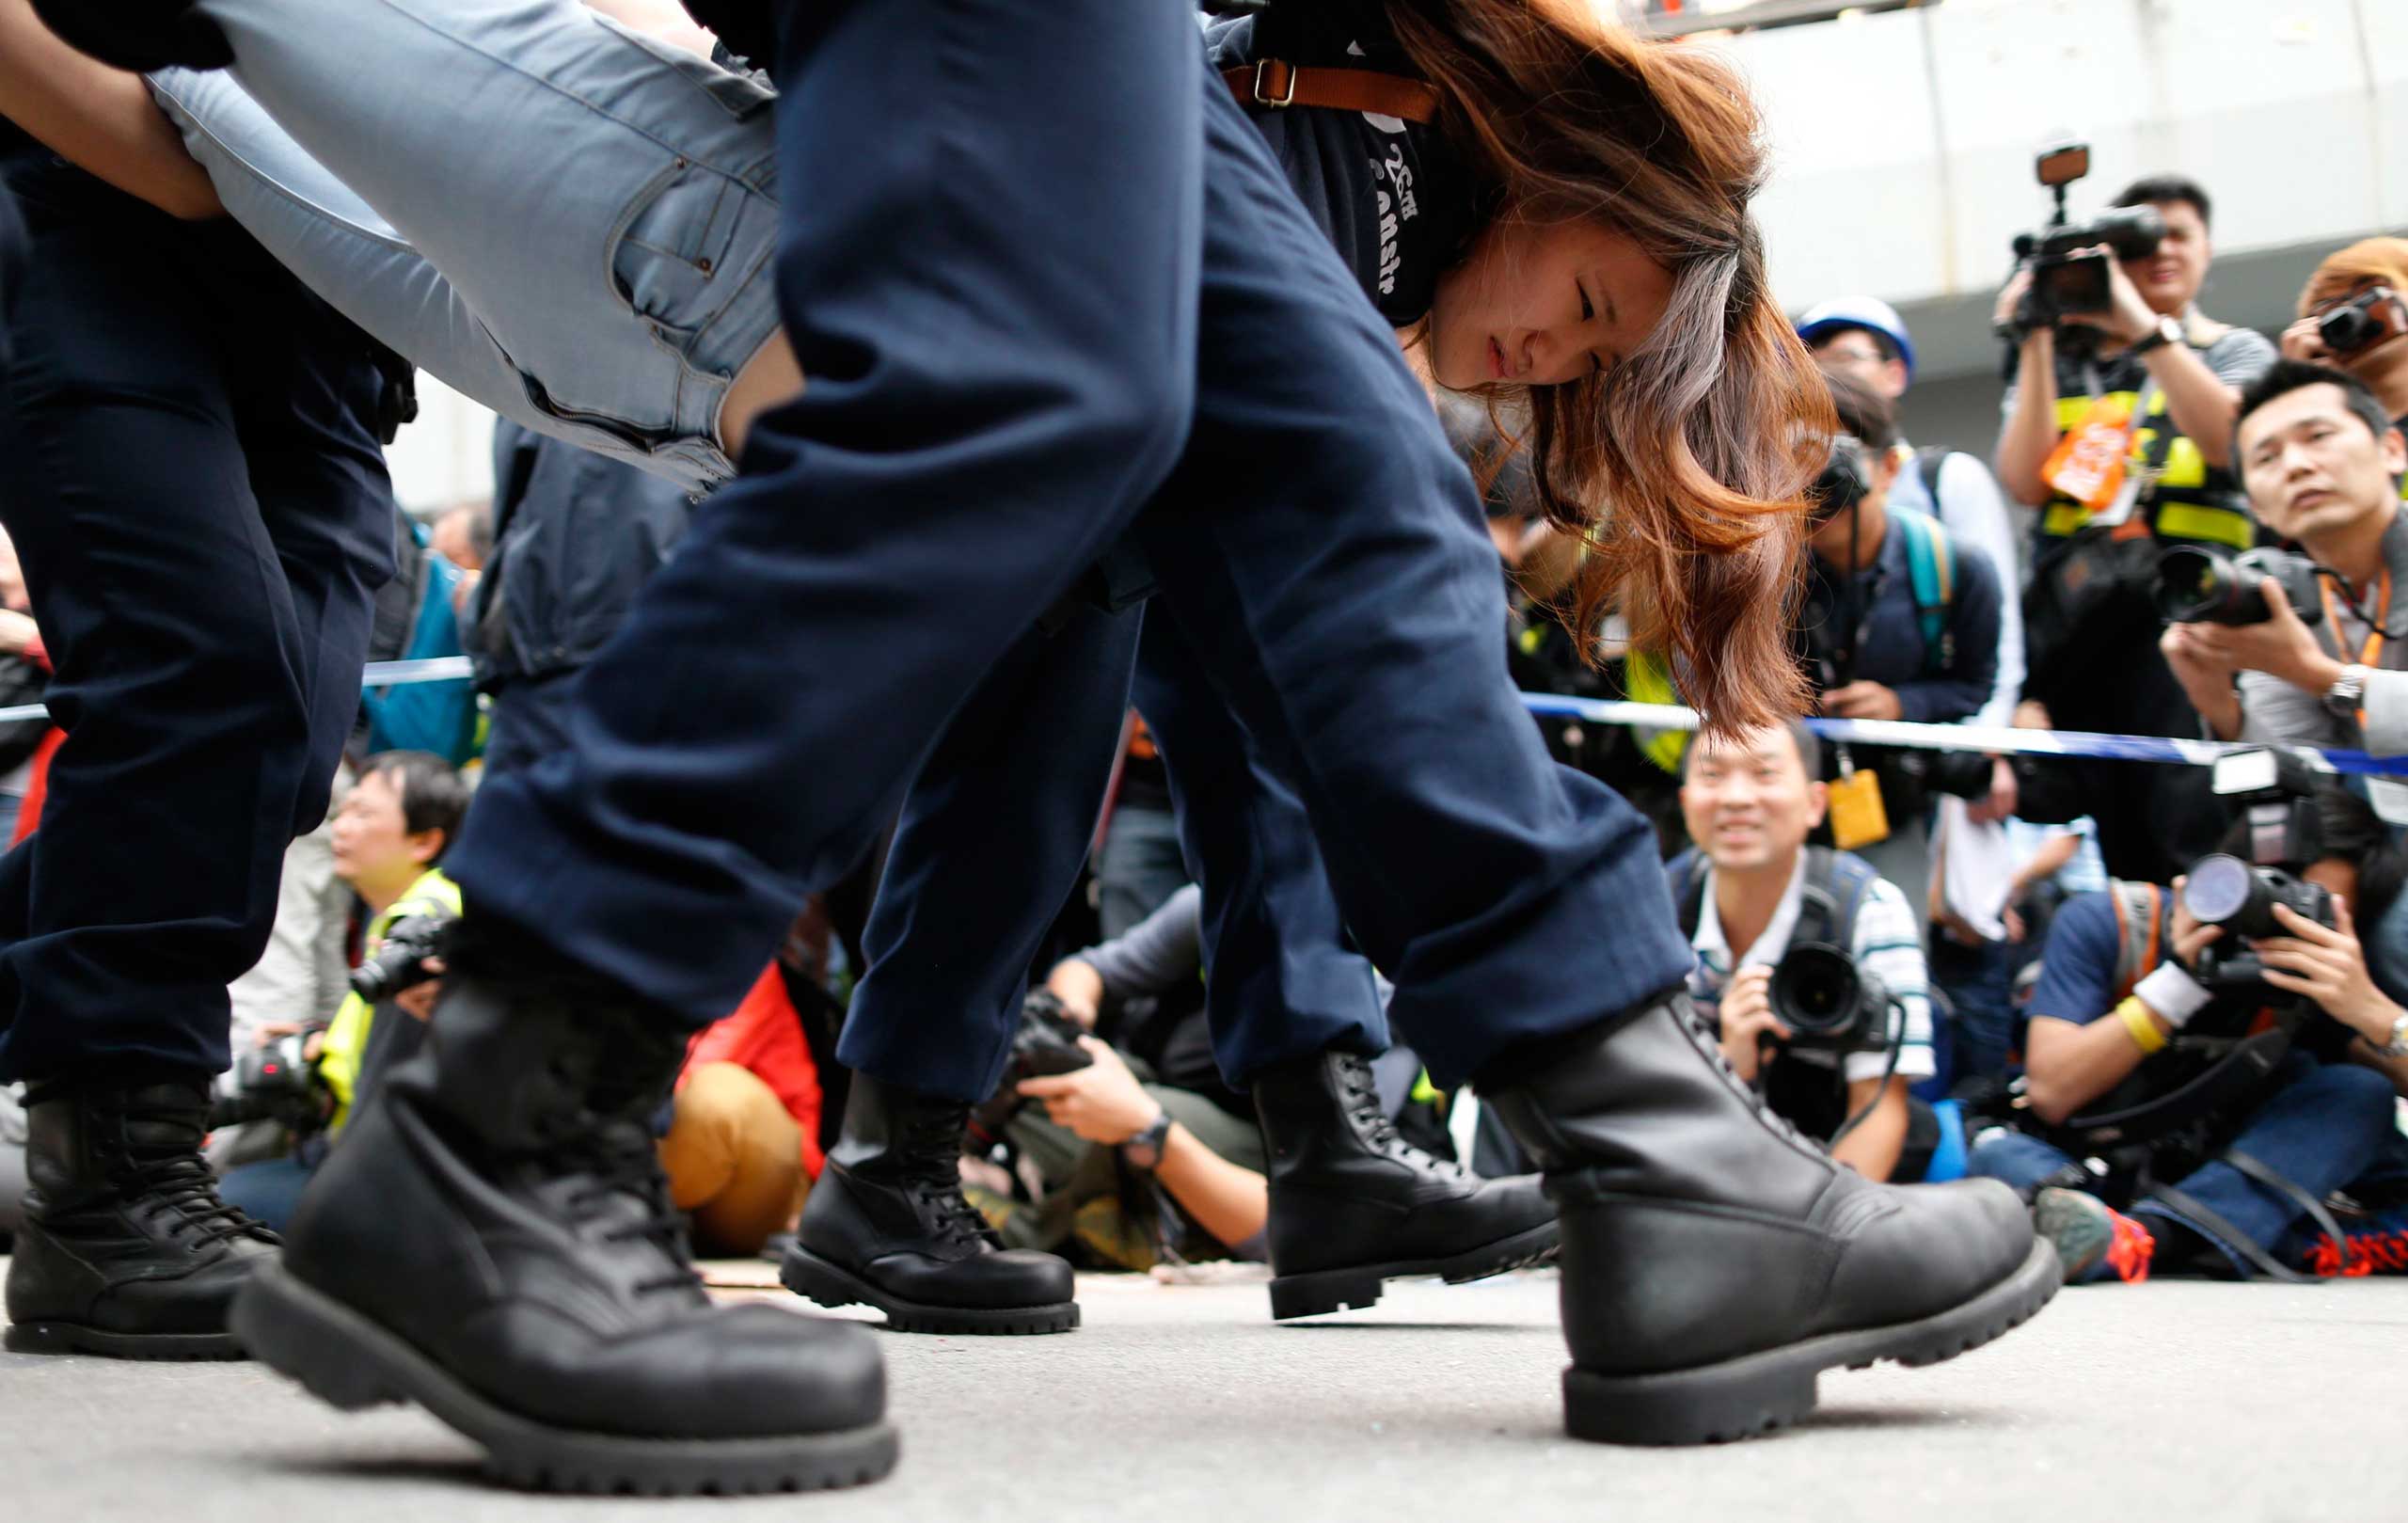 Dec. 11, 2014. A demonstrator is taken away by police from an area previously blocked by pro-democracy supporters, outside the government headquarters in Hong Kong.